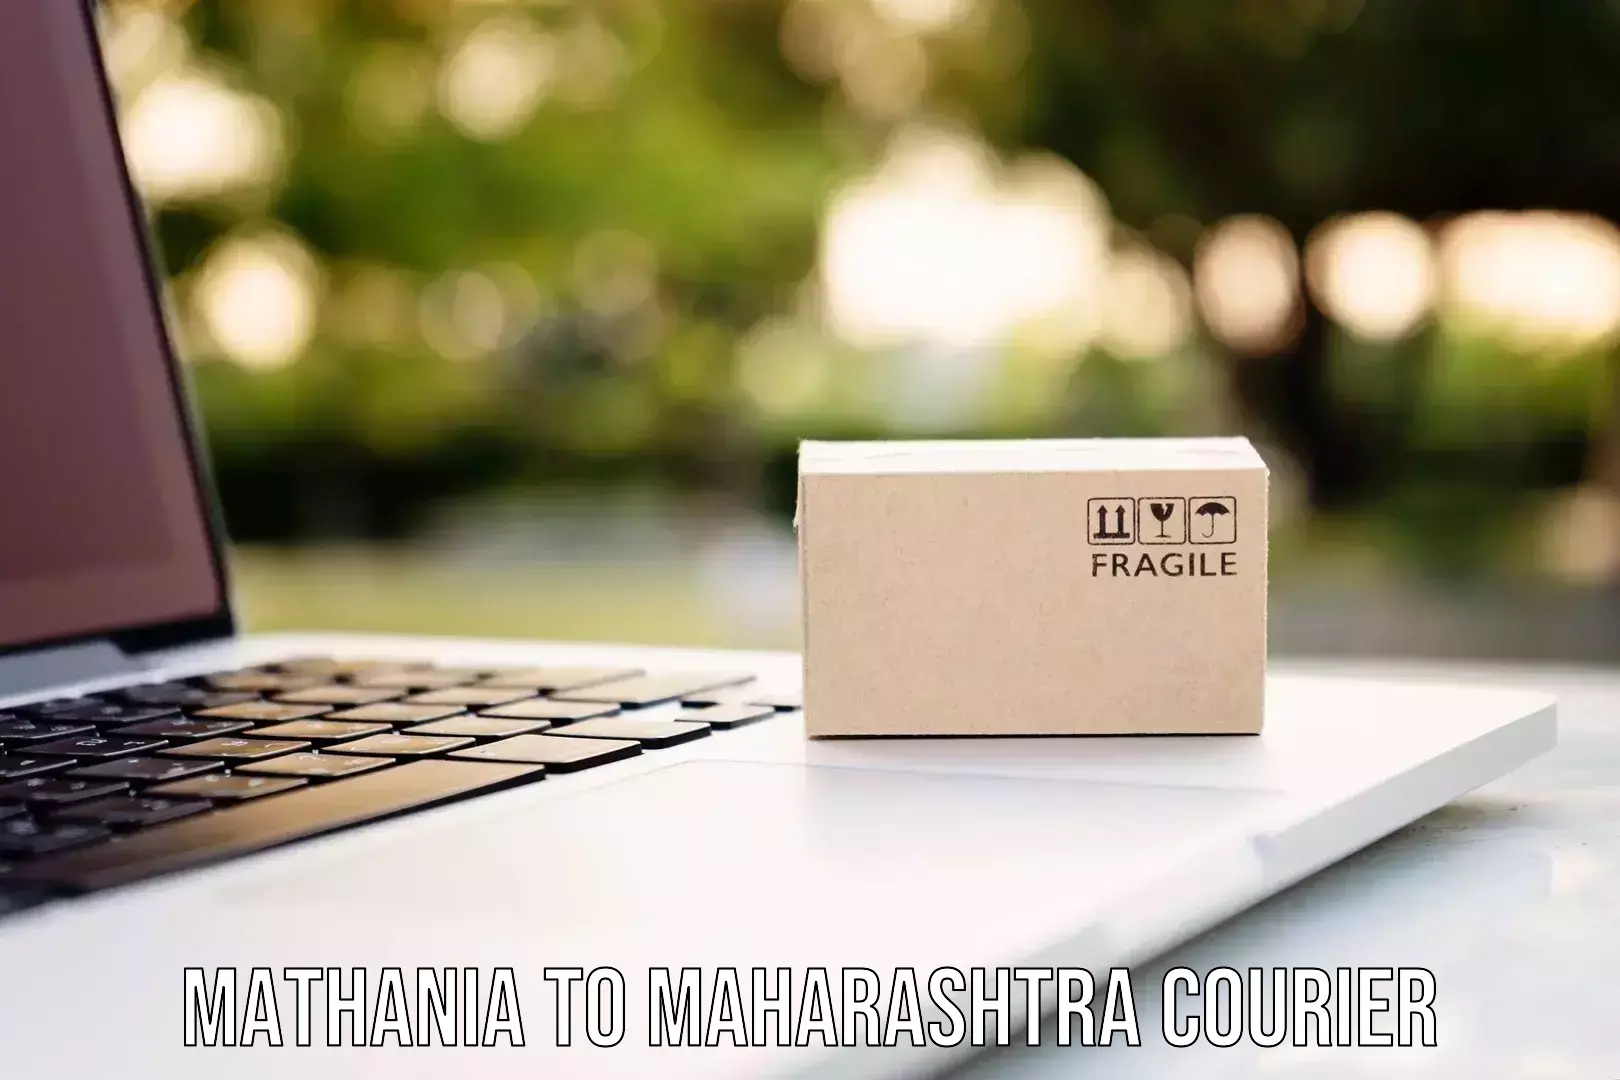 Courier service innovation Mathania to Nagothane